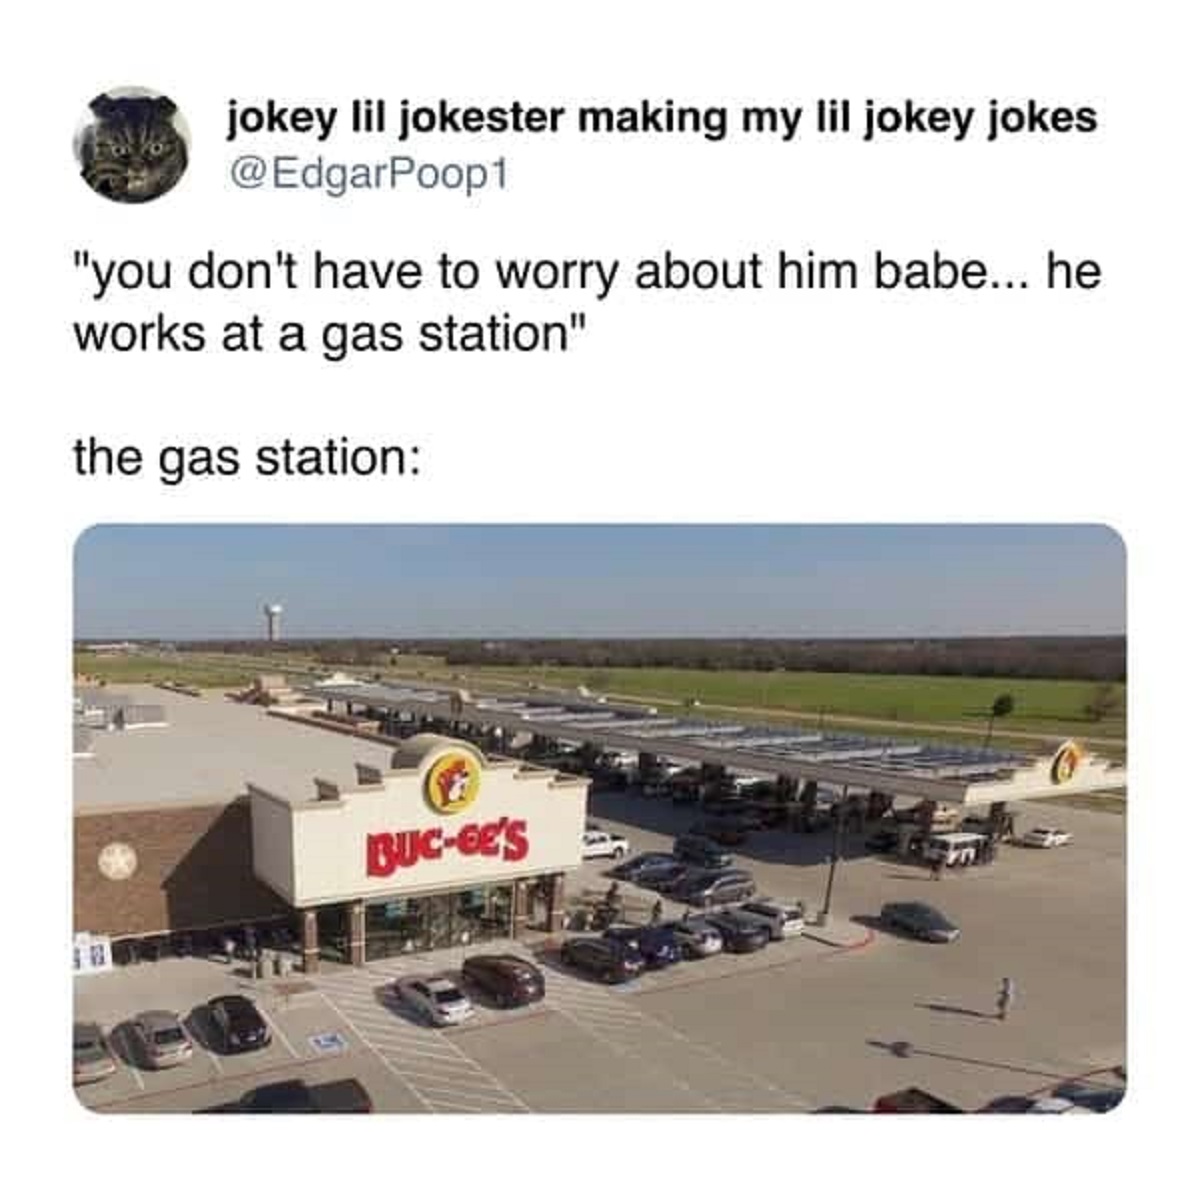 bucky's in texas - jokey lil jokester making my lil jokey jokes "you don't have to worry about him babe... he works at a gas station" the gas station BucGe'S